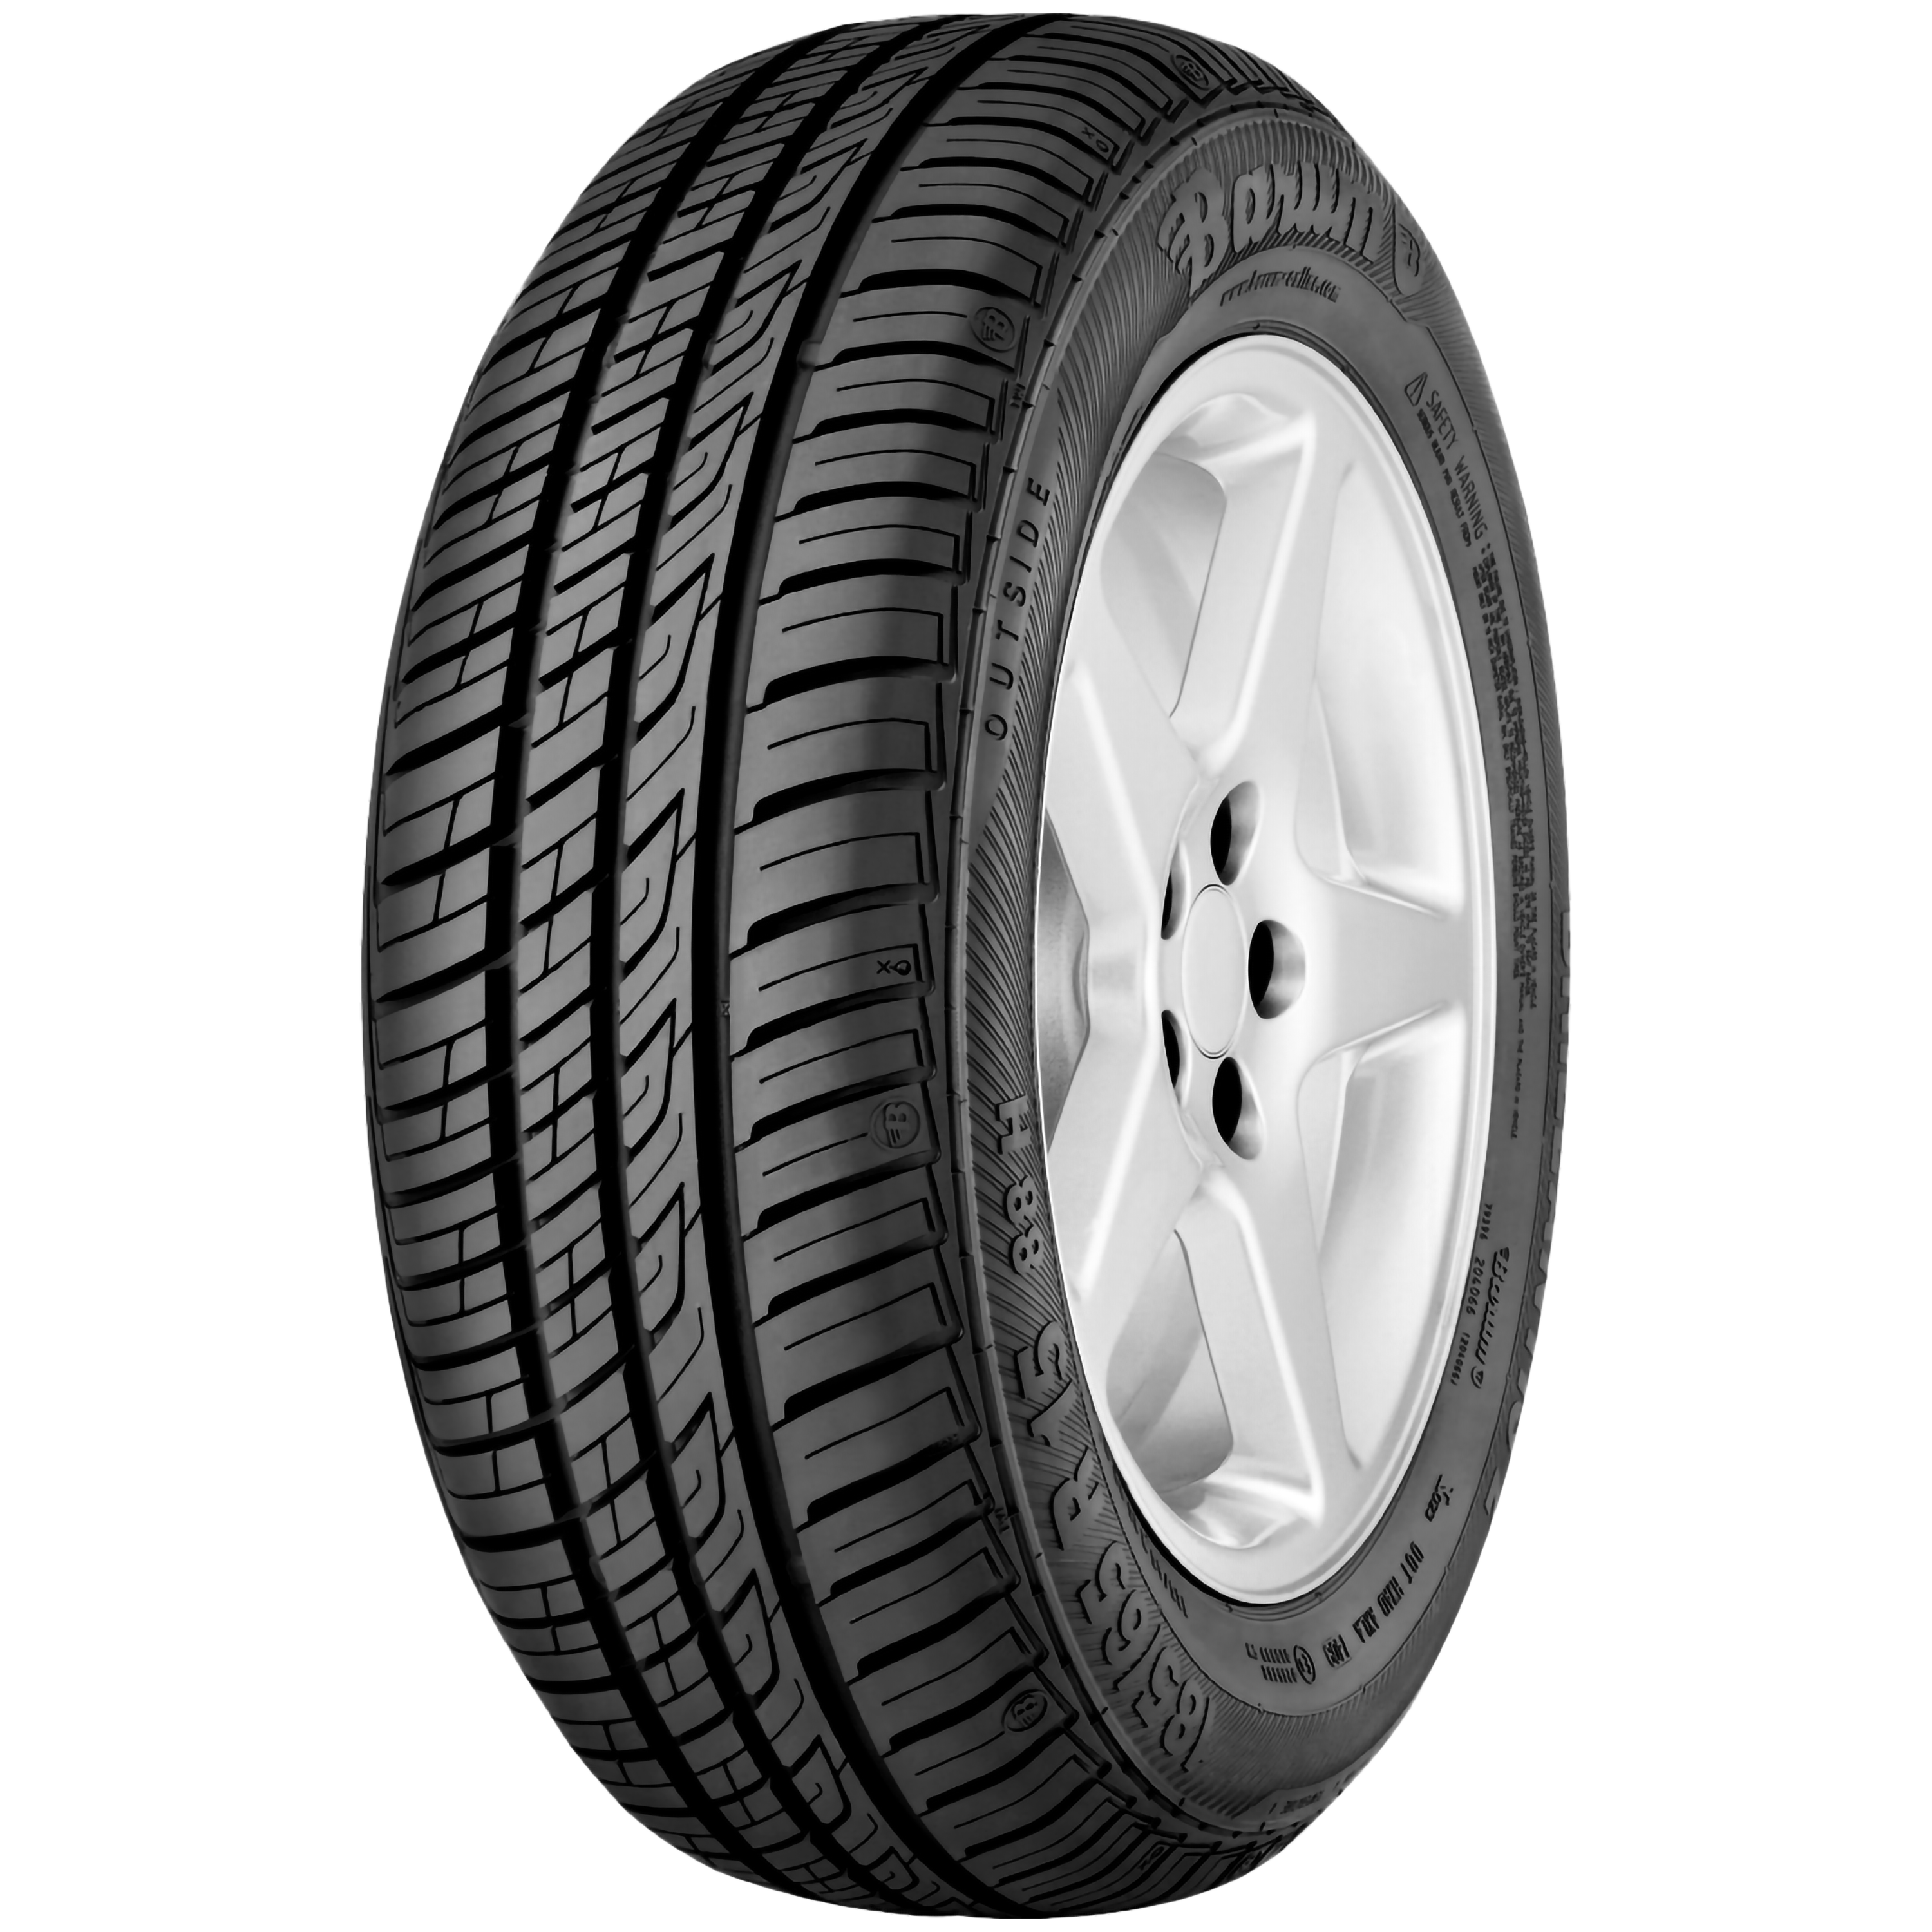 Barum Brillantis 2 - long life summer & for car The | SUV your tyre high Barum mileage with